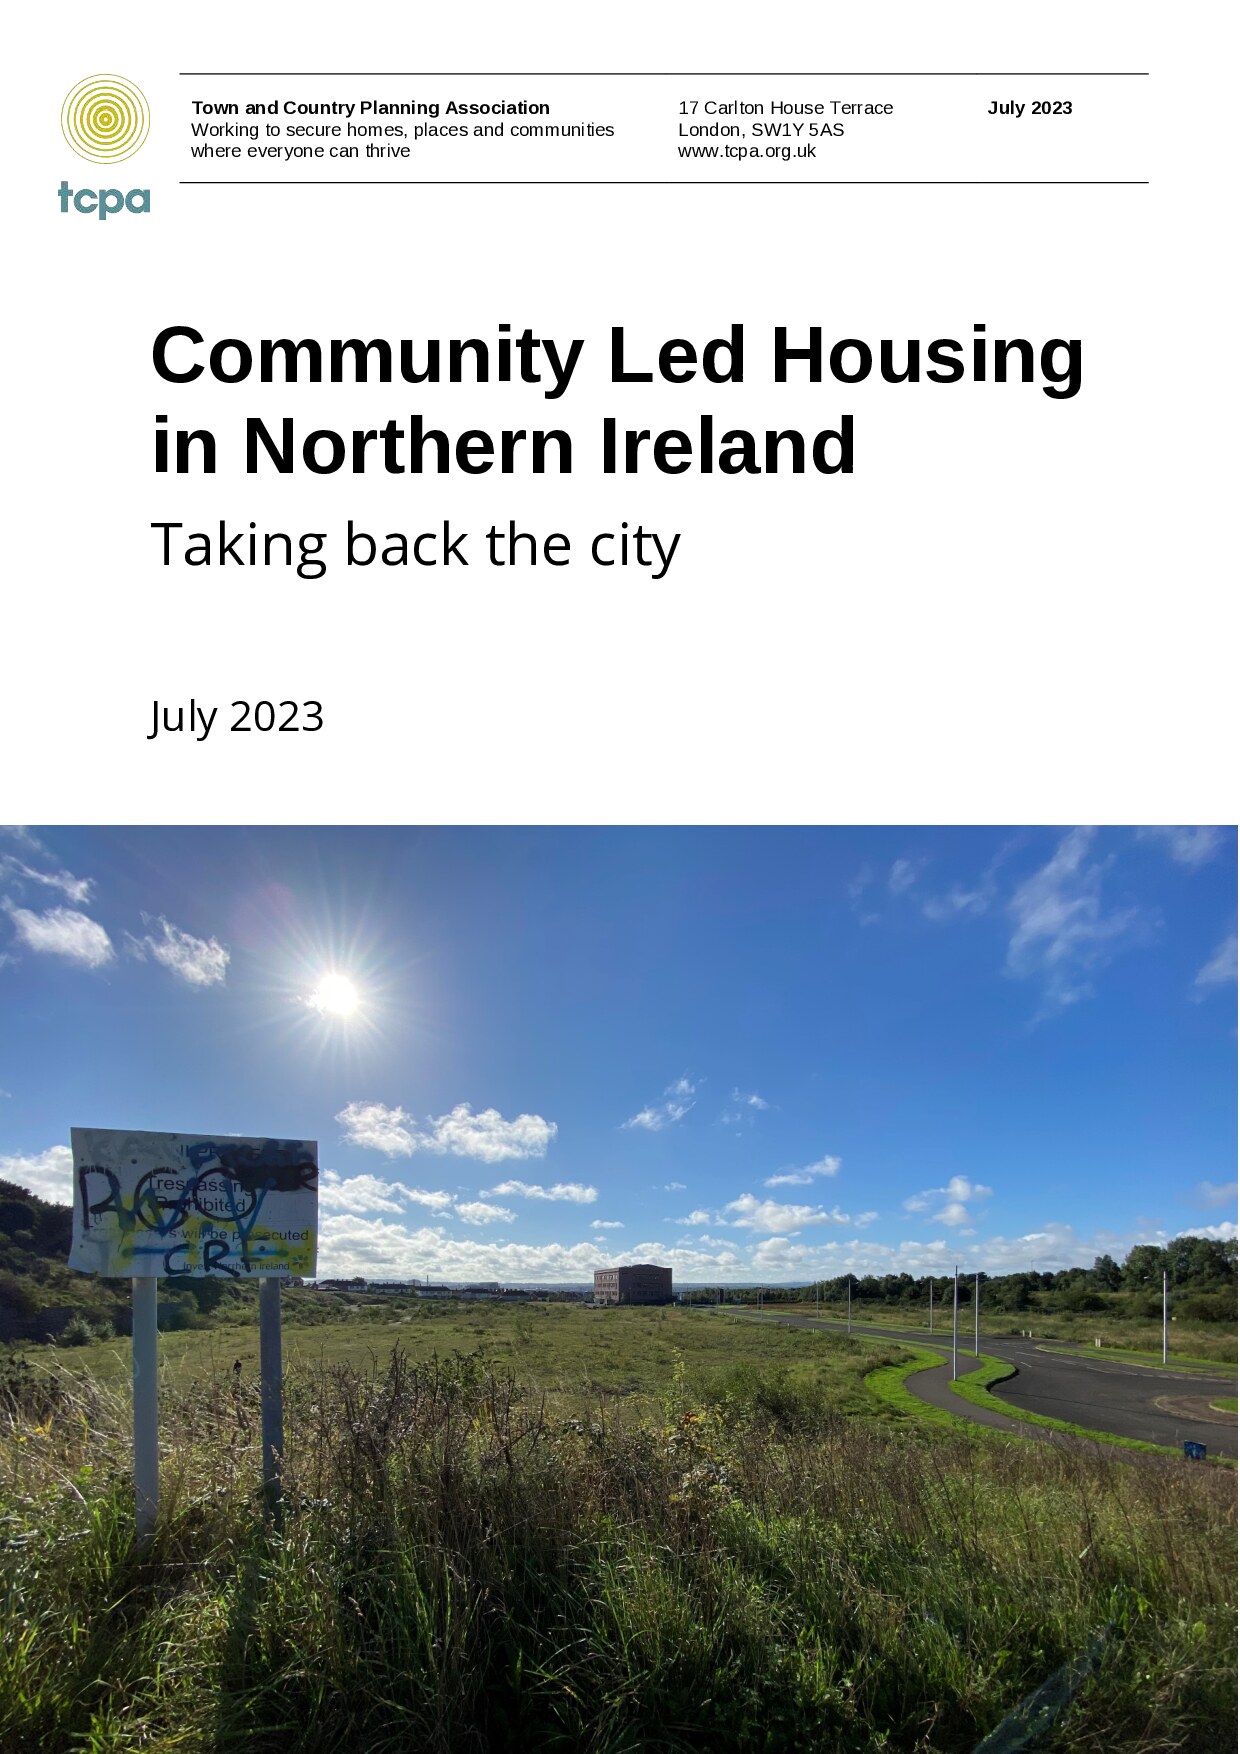 Community Led Housing in Northern Ireland: Take back the city